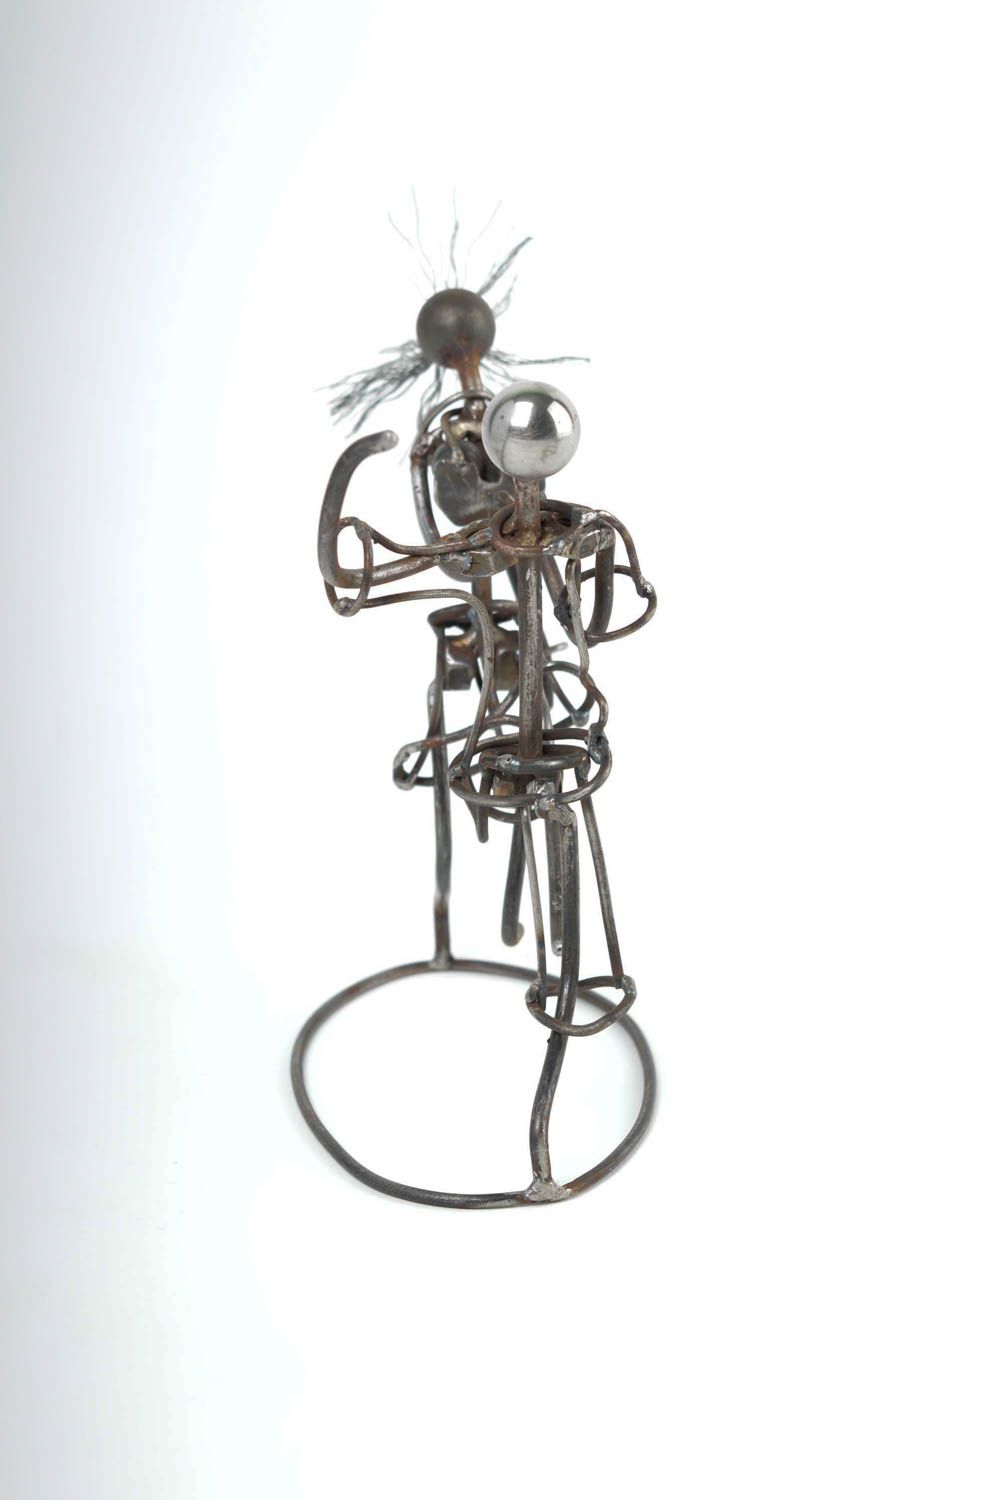 Unusual handmade metal figurine interior decorating gift ideas for decor only photo 4